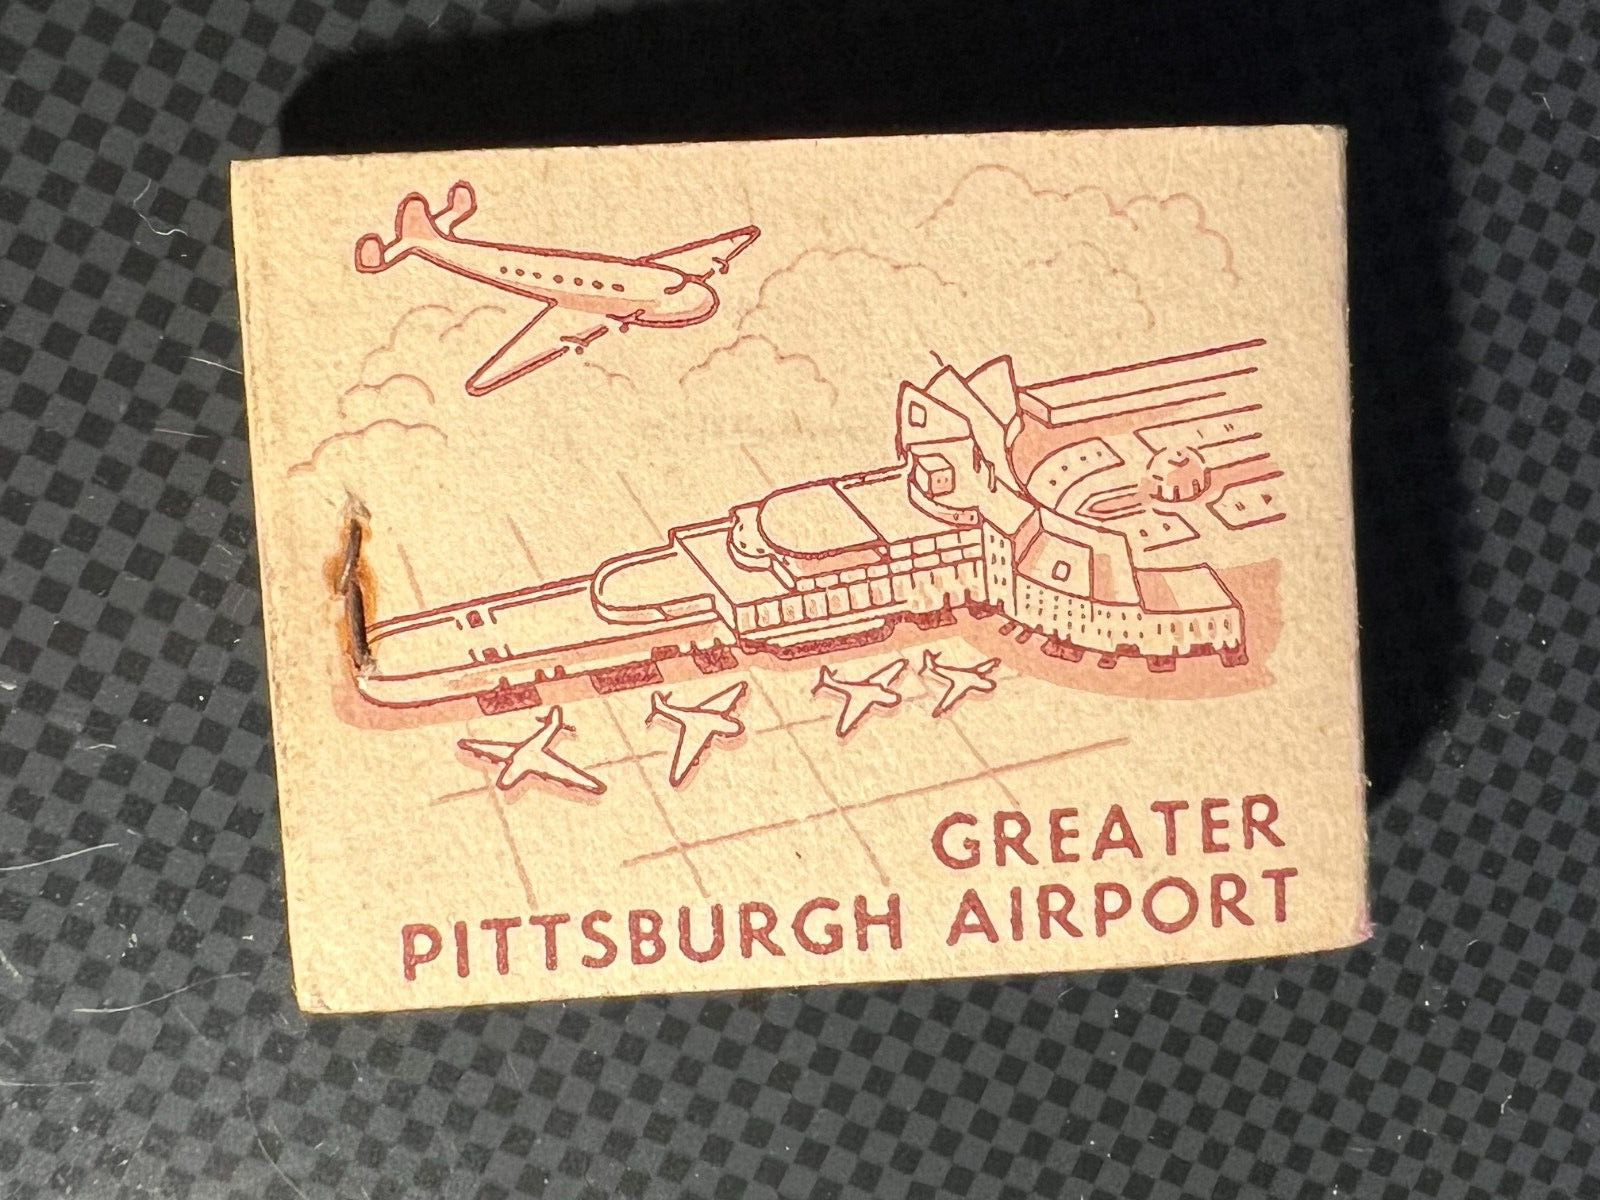 VINTAGE MATCHBOOK - A. C. CO. - GREATER PITTSBURGH AIRPORT  - UNSTRUCK